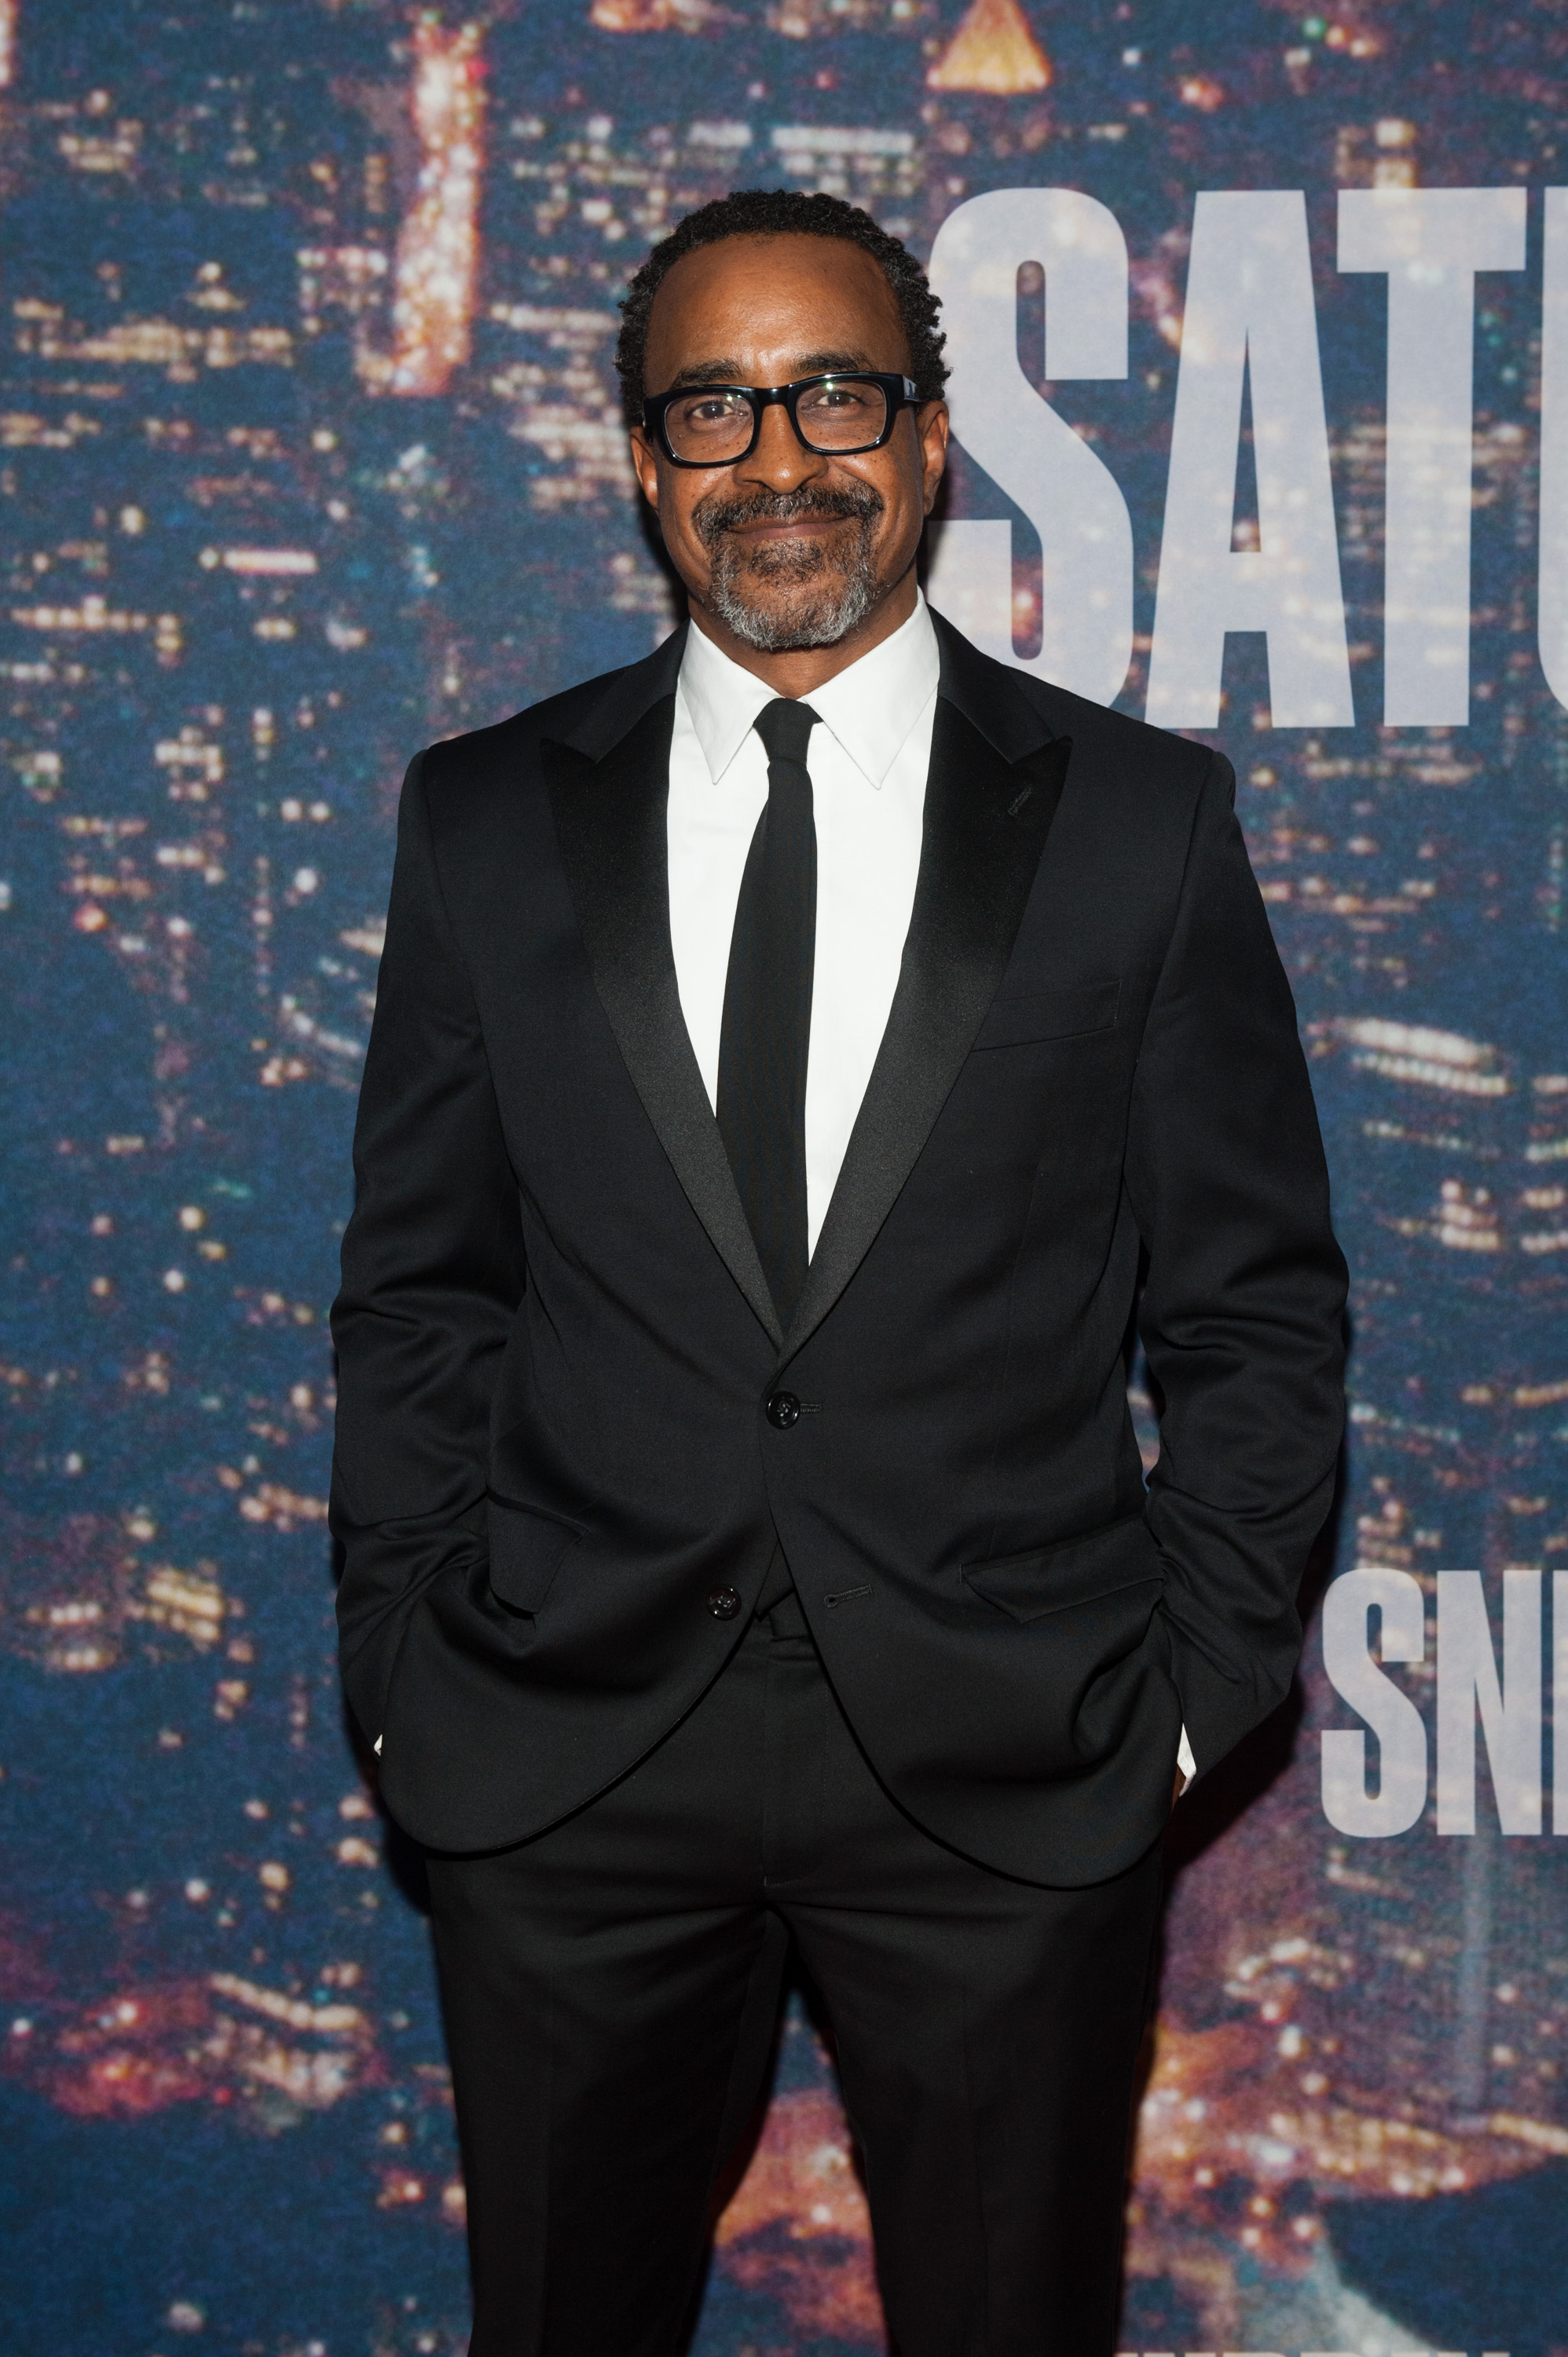 Tim Meadows attends the "SNL" 40th Anniversary Celebration at Rockefeller Plaza on February 15, 2015, in New York City. | Source: Getty Images